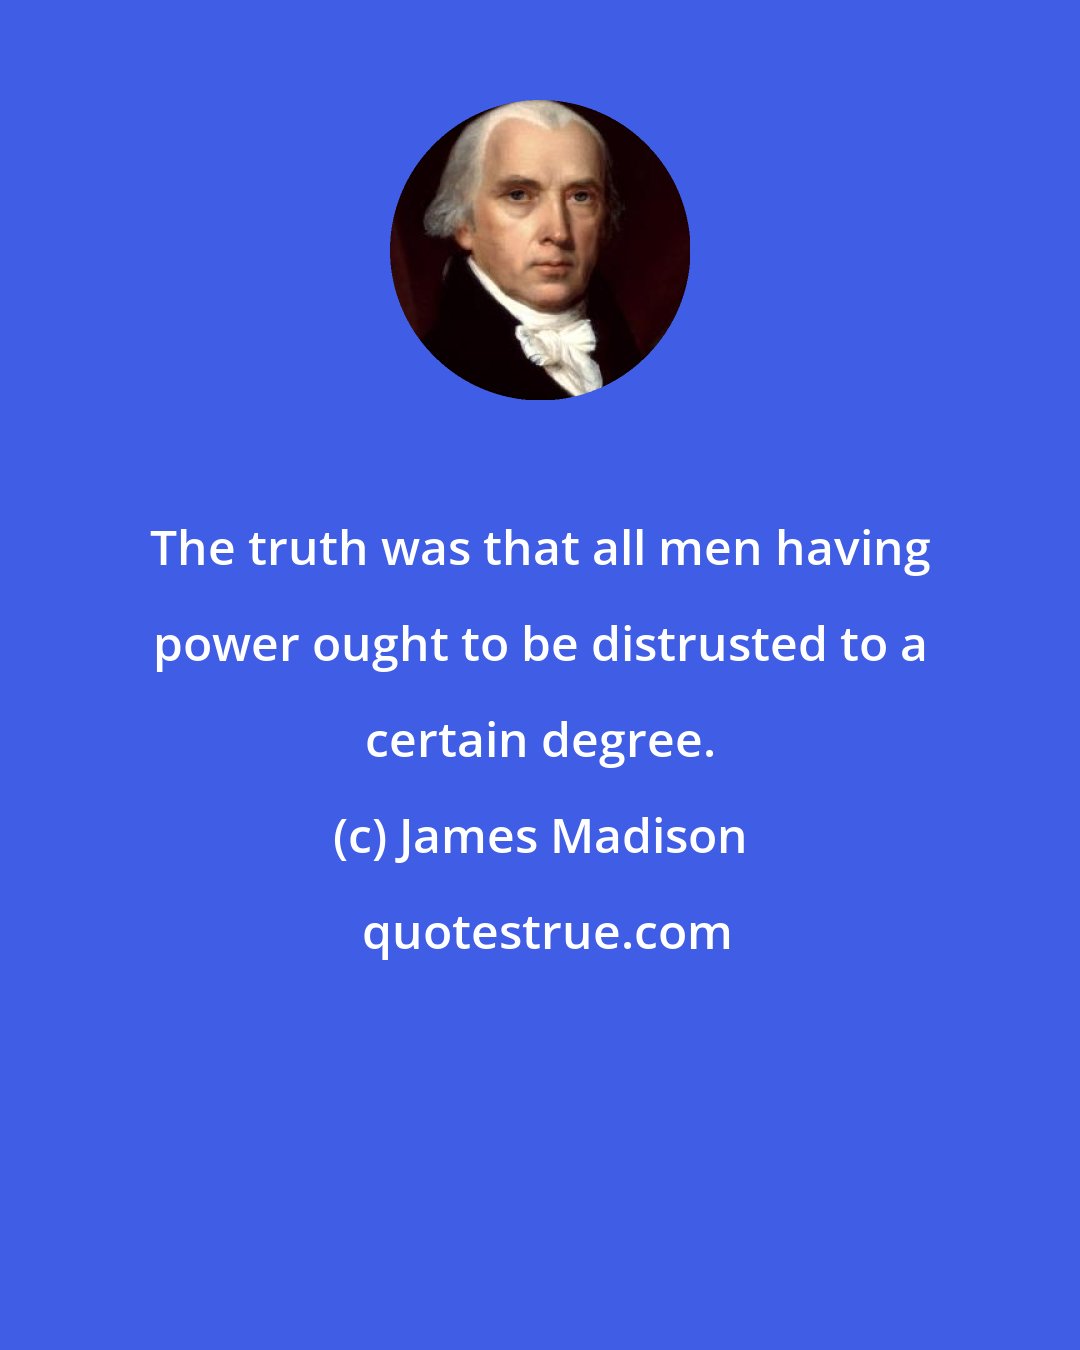 James Madison: The truth was that all men having power ought to be distrusted to a certain degree.